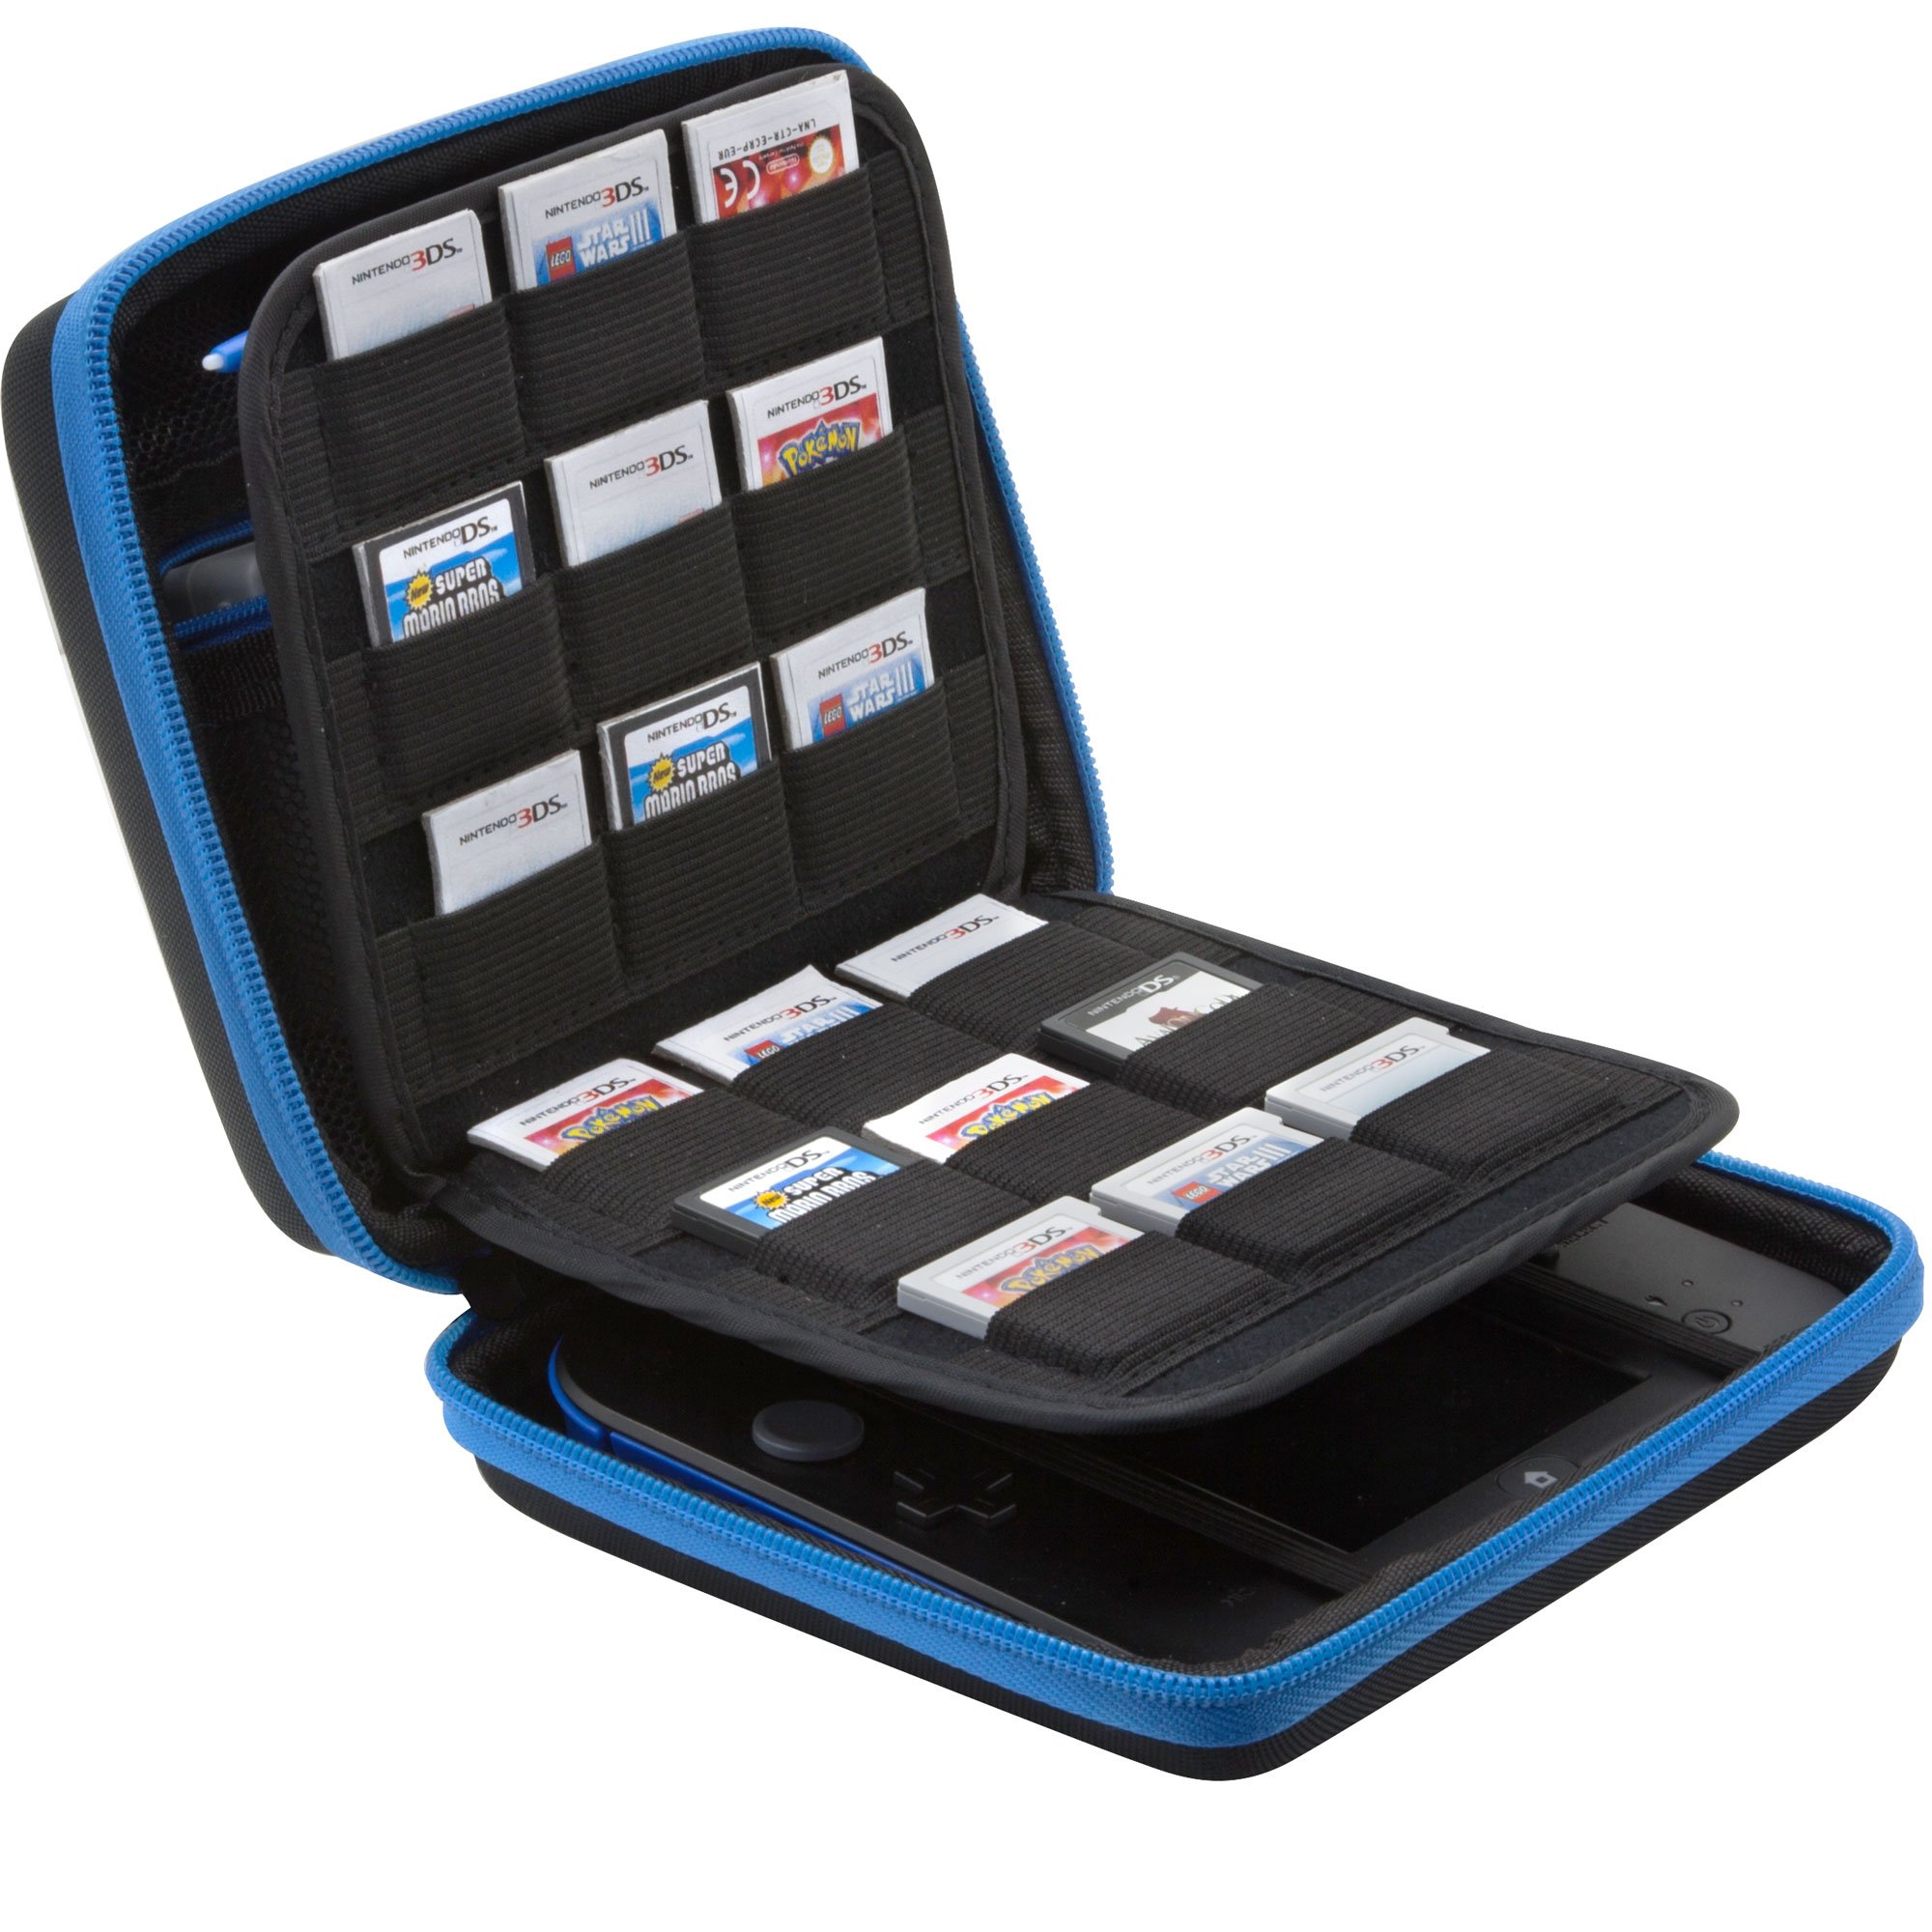 BRENDO Carrying Case for Nintendo 2DS with 24 Game Storage Holders, Fits Charger - Black/Blue